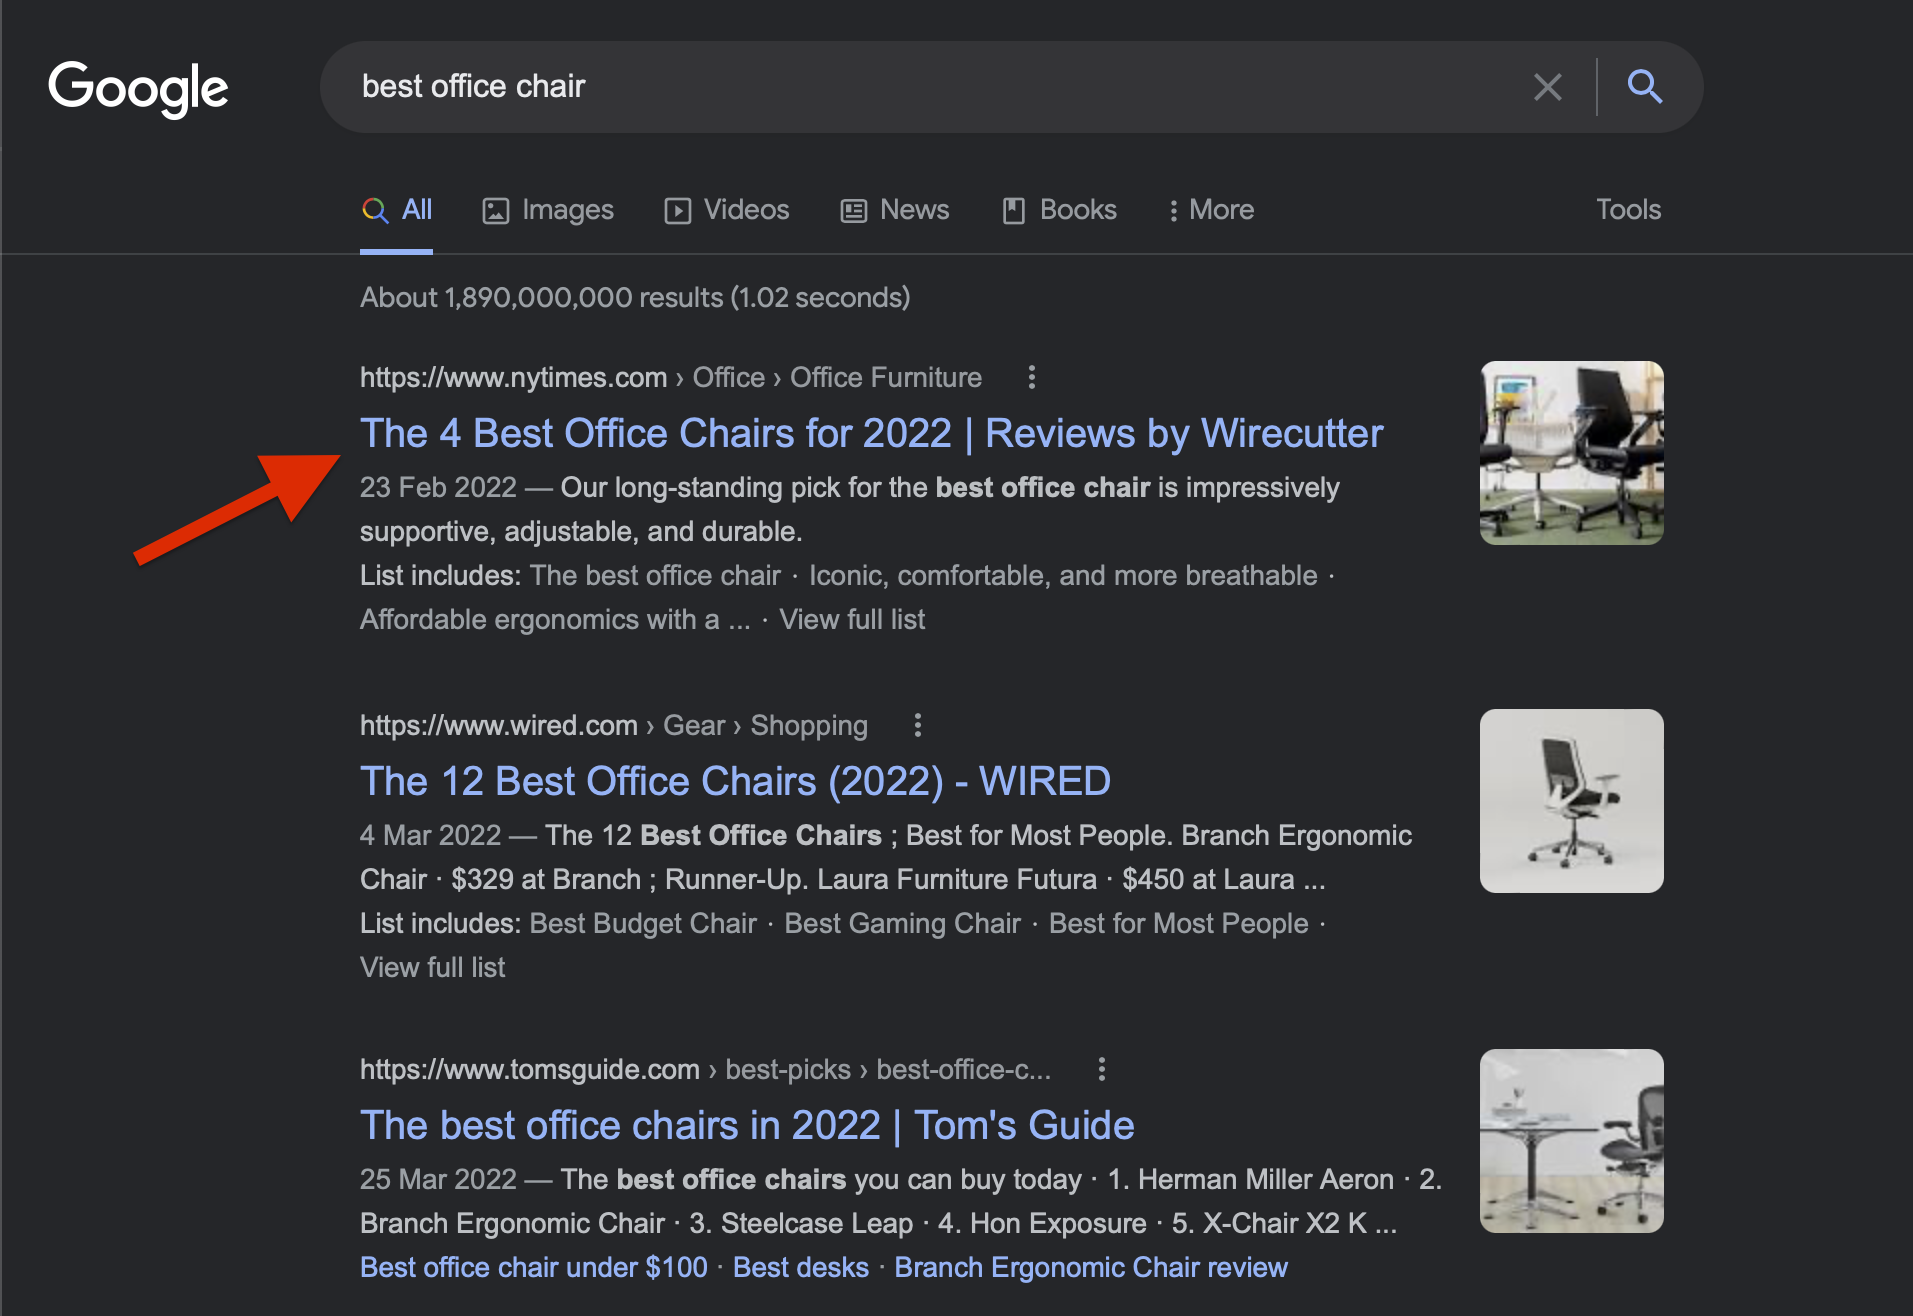 Google search engine results page for 'best office chair'